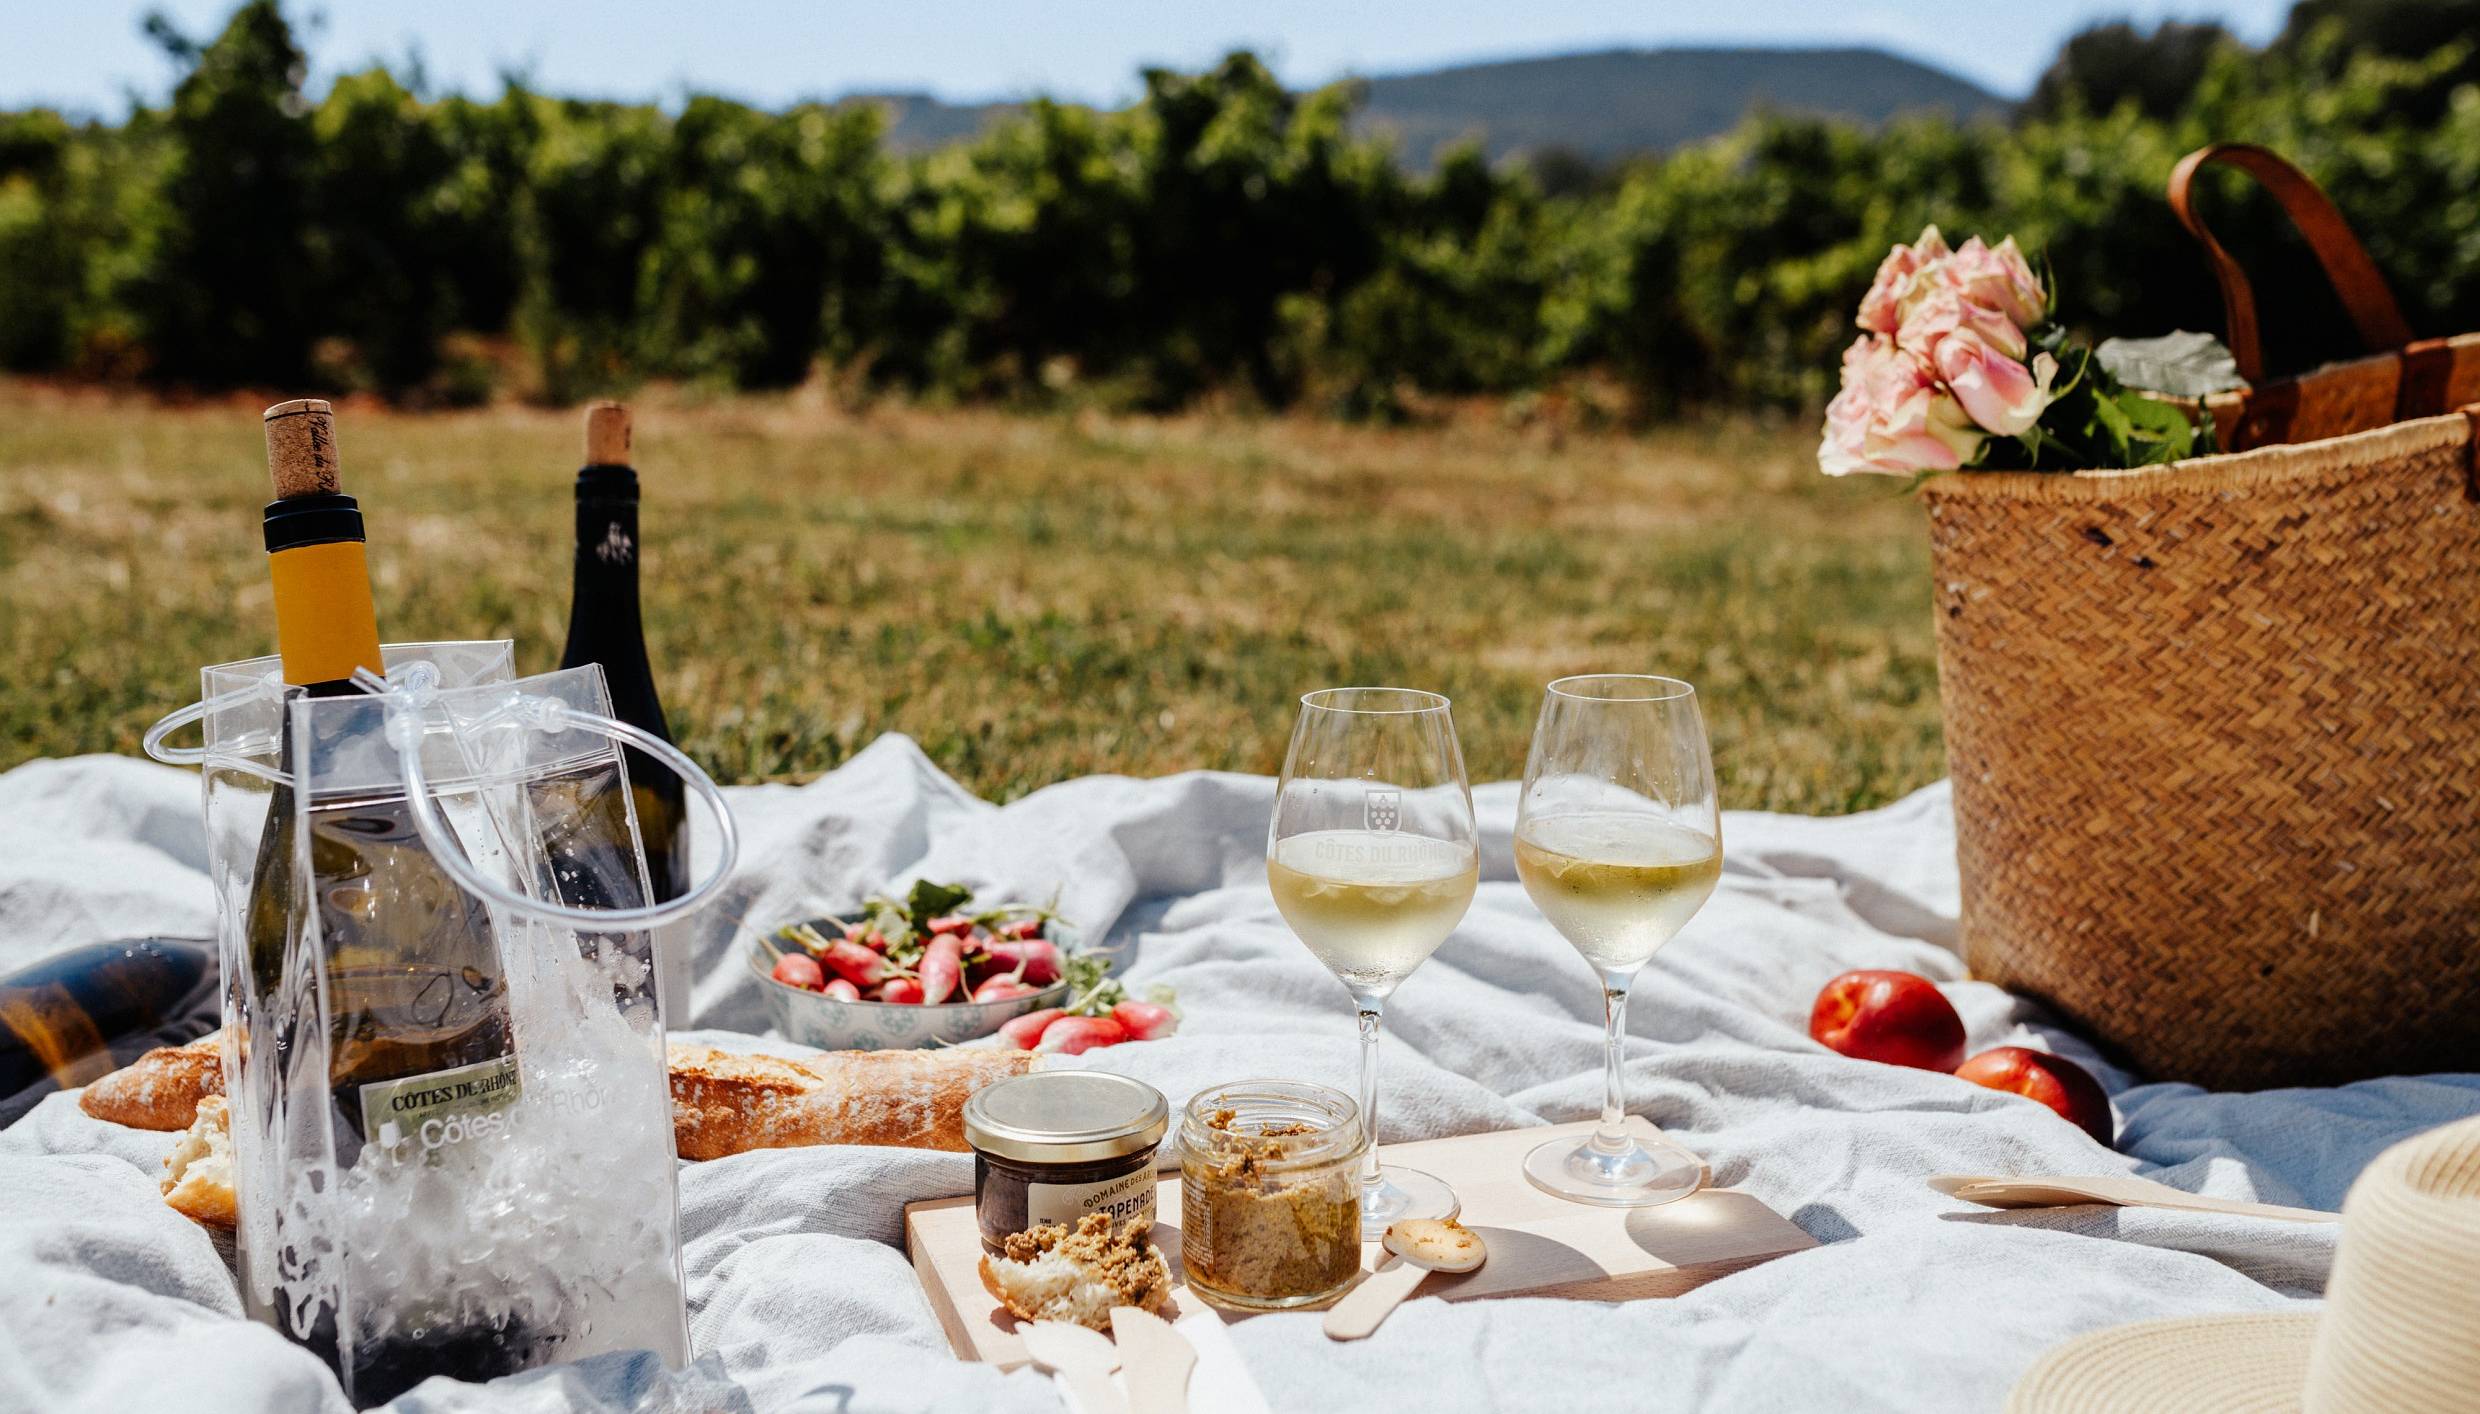 White Rhone wine picnic outside with picked flowers, copyright Camille Meffre